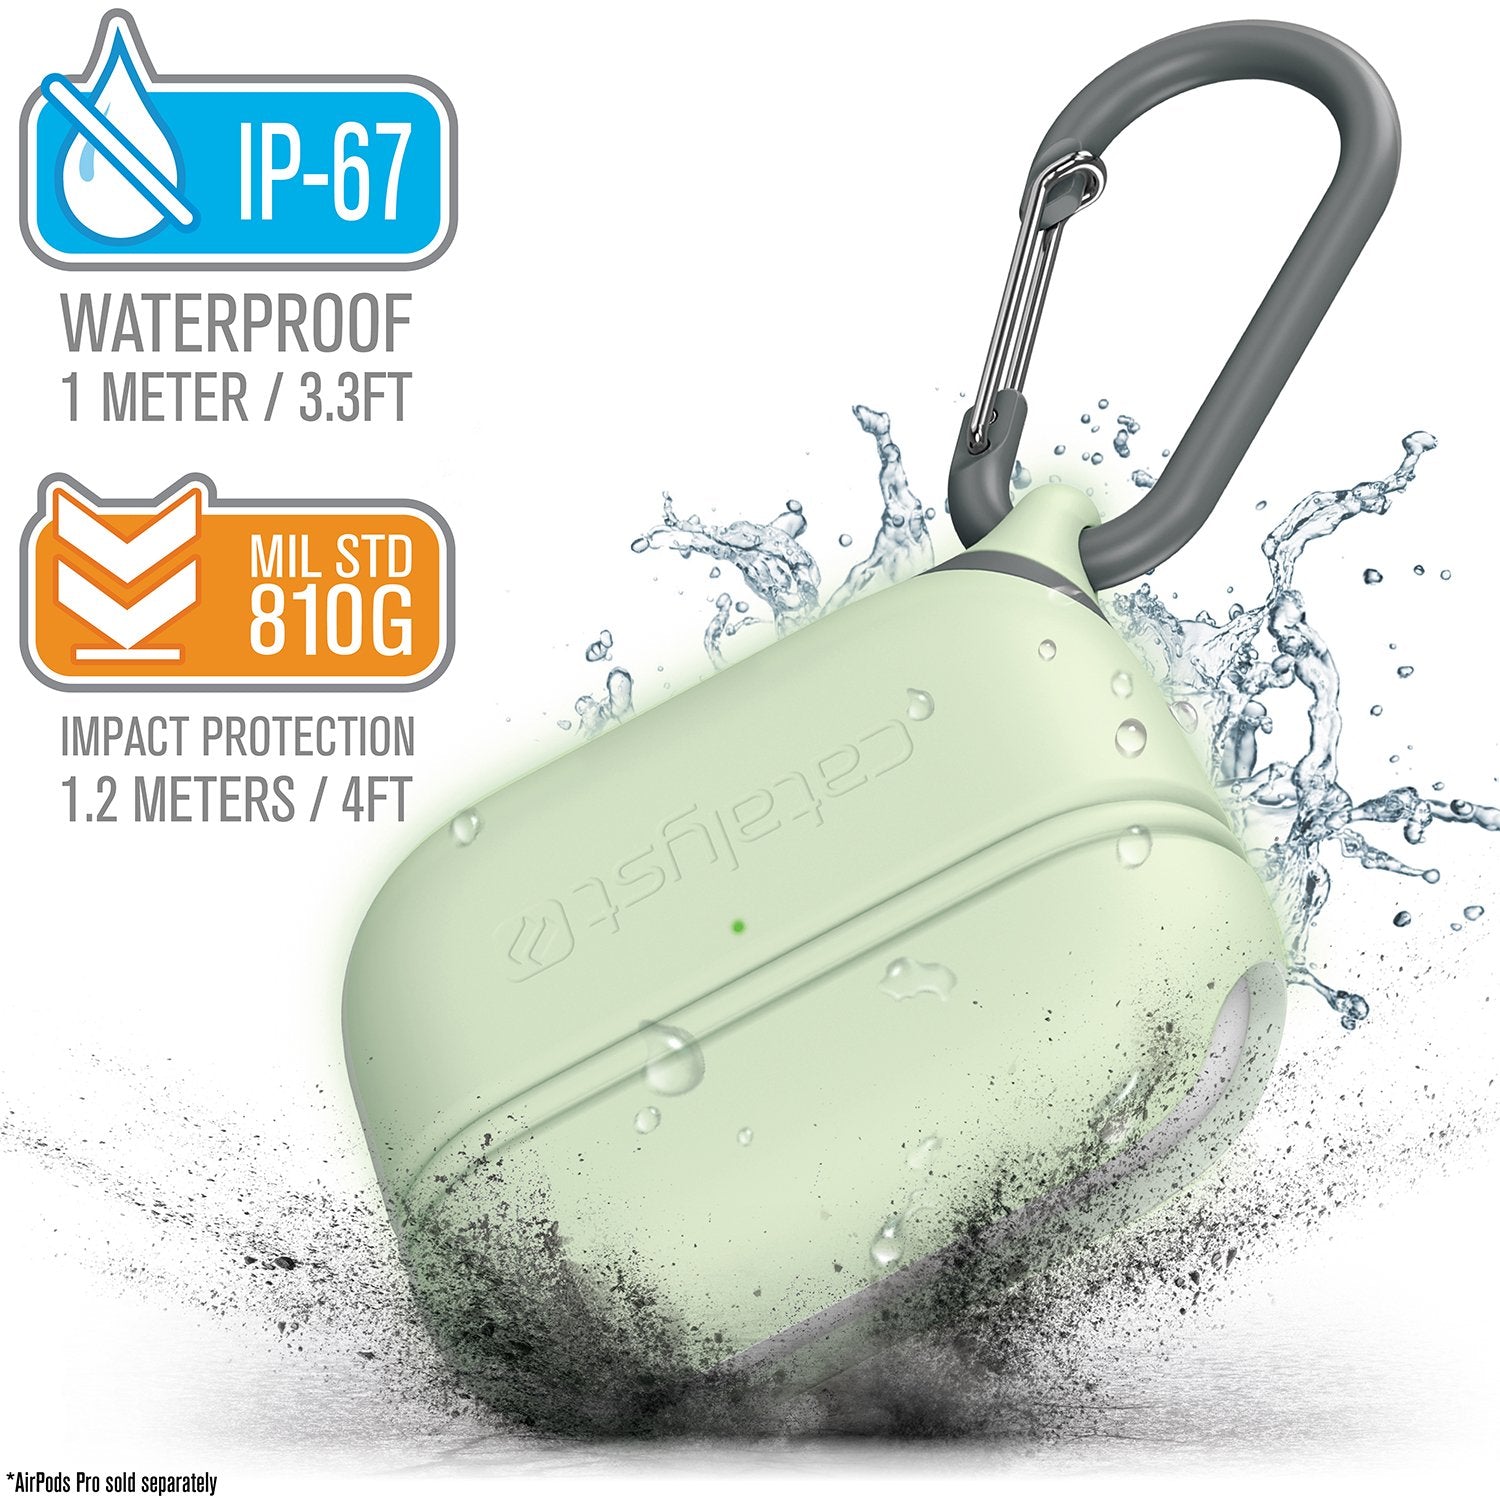 Waterproof AirPods Pro Case - Special Edition